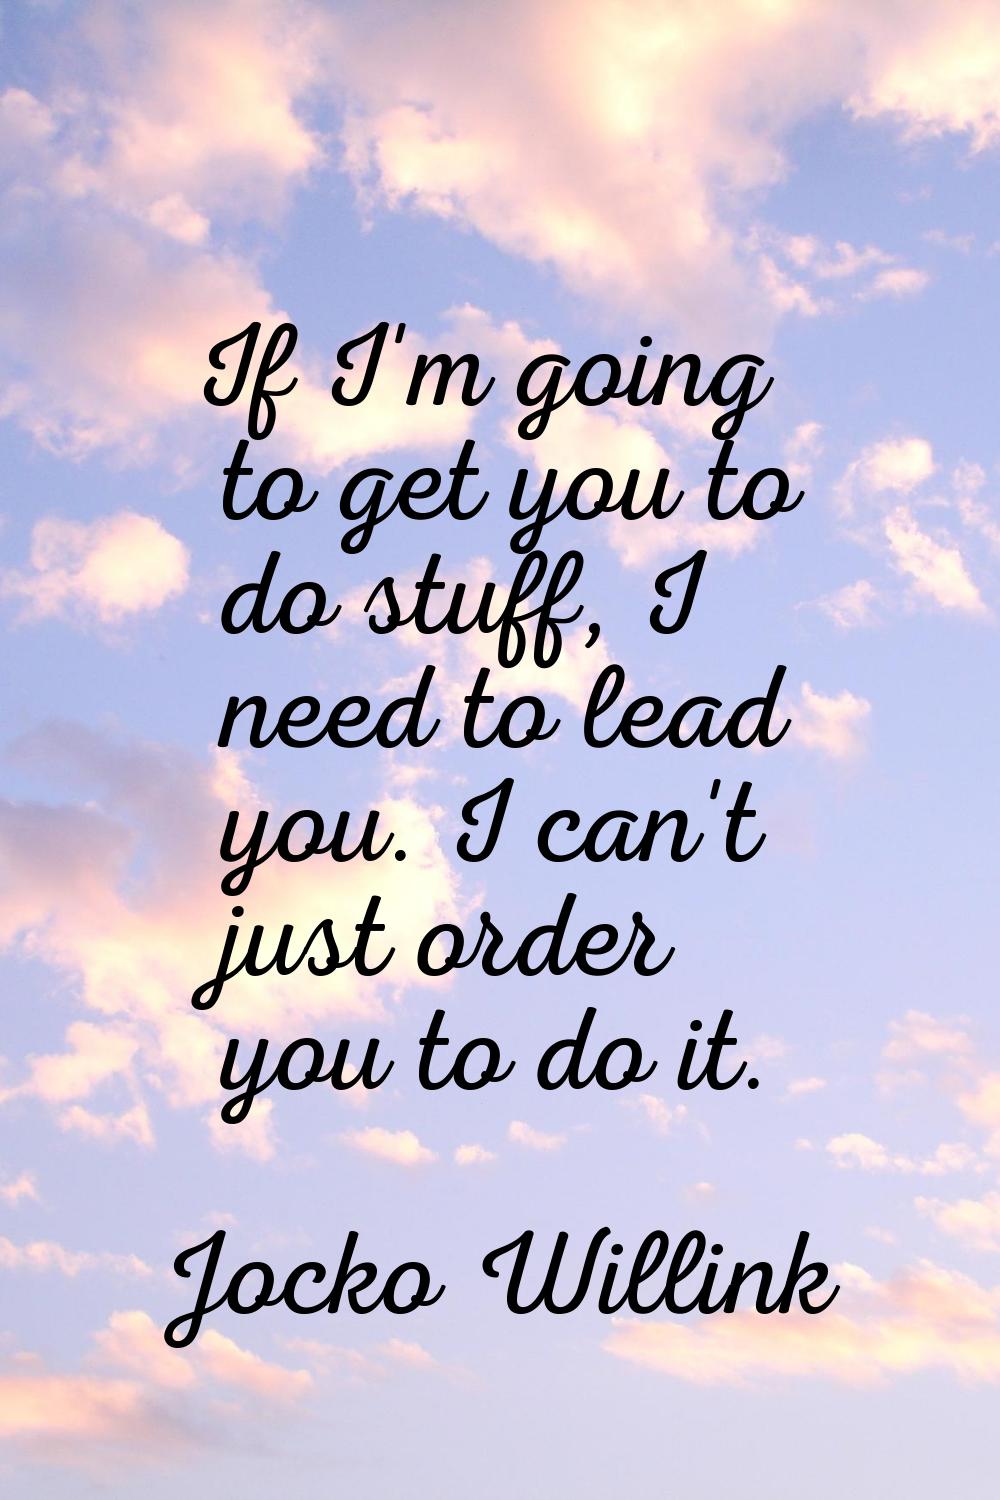 If I'm going to get you to do stuff, I need to lead you. I can't just order you to do it.